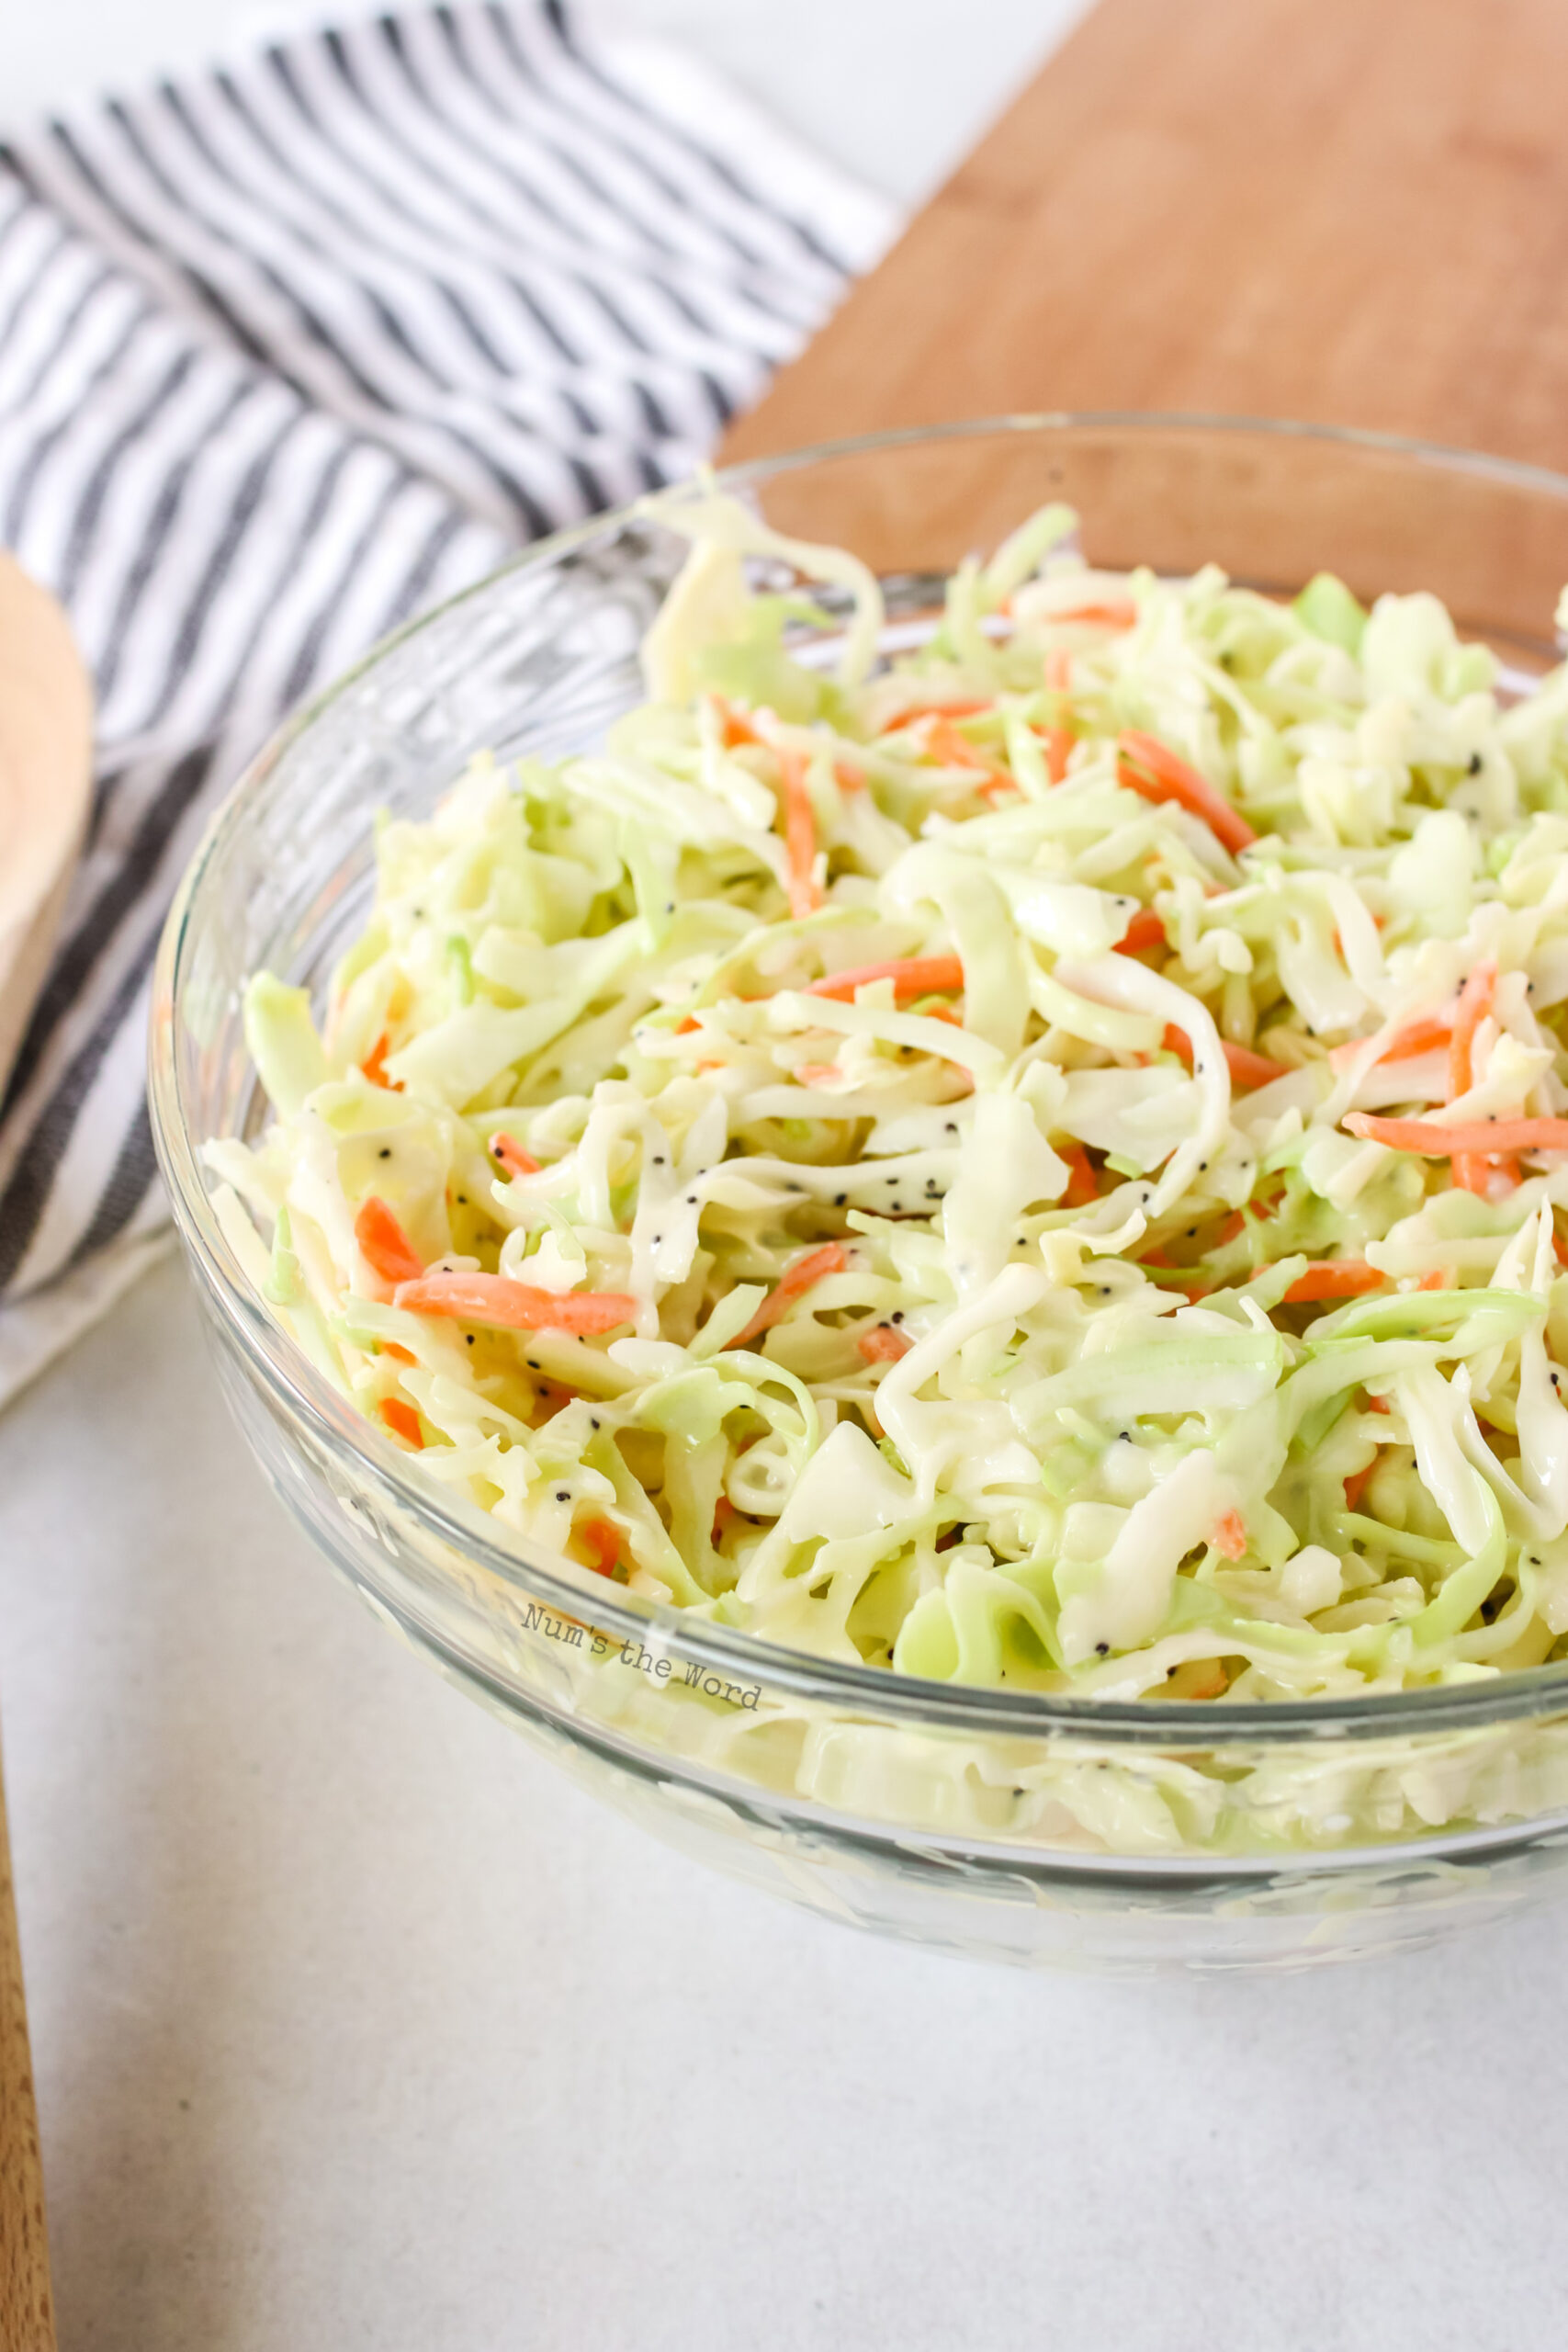 ready to eat creamy coleslaw in a glass serving bowl